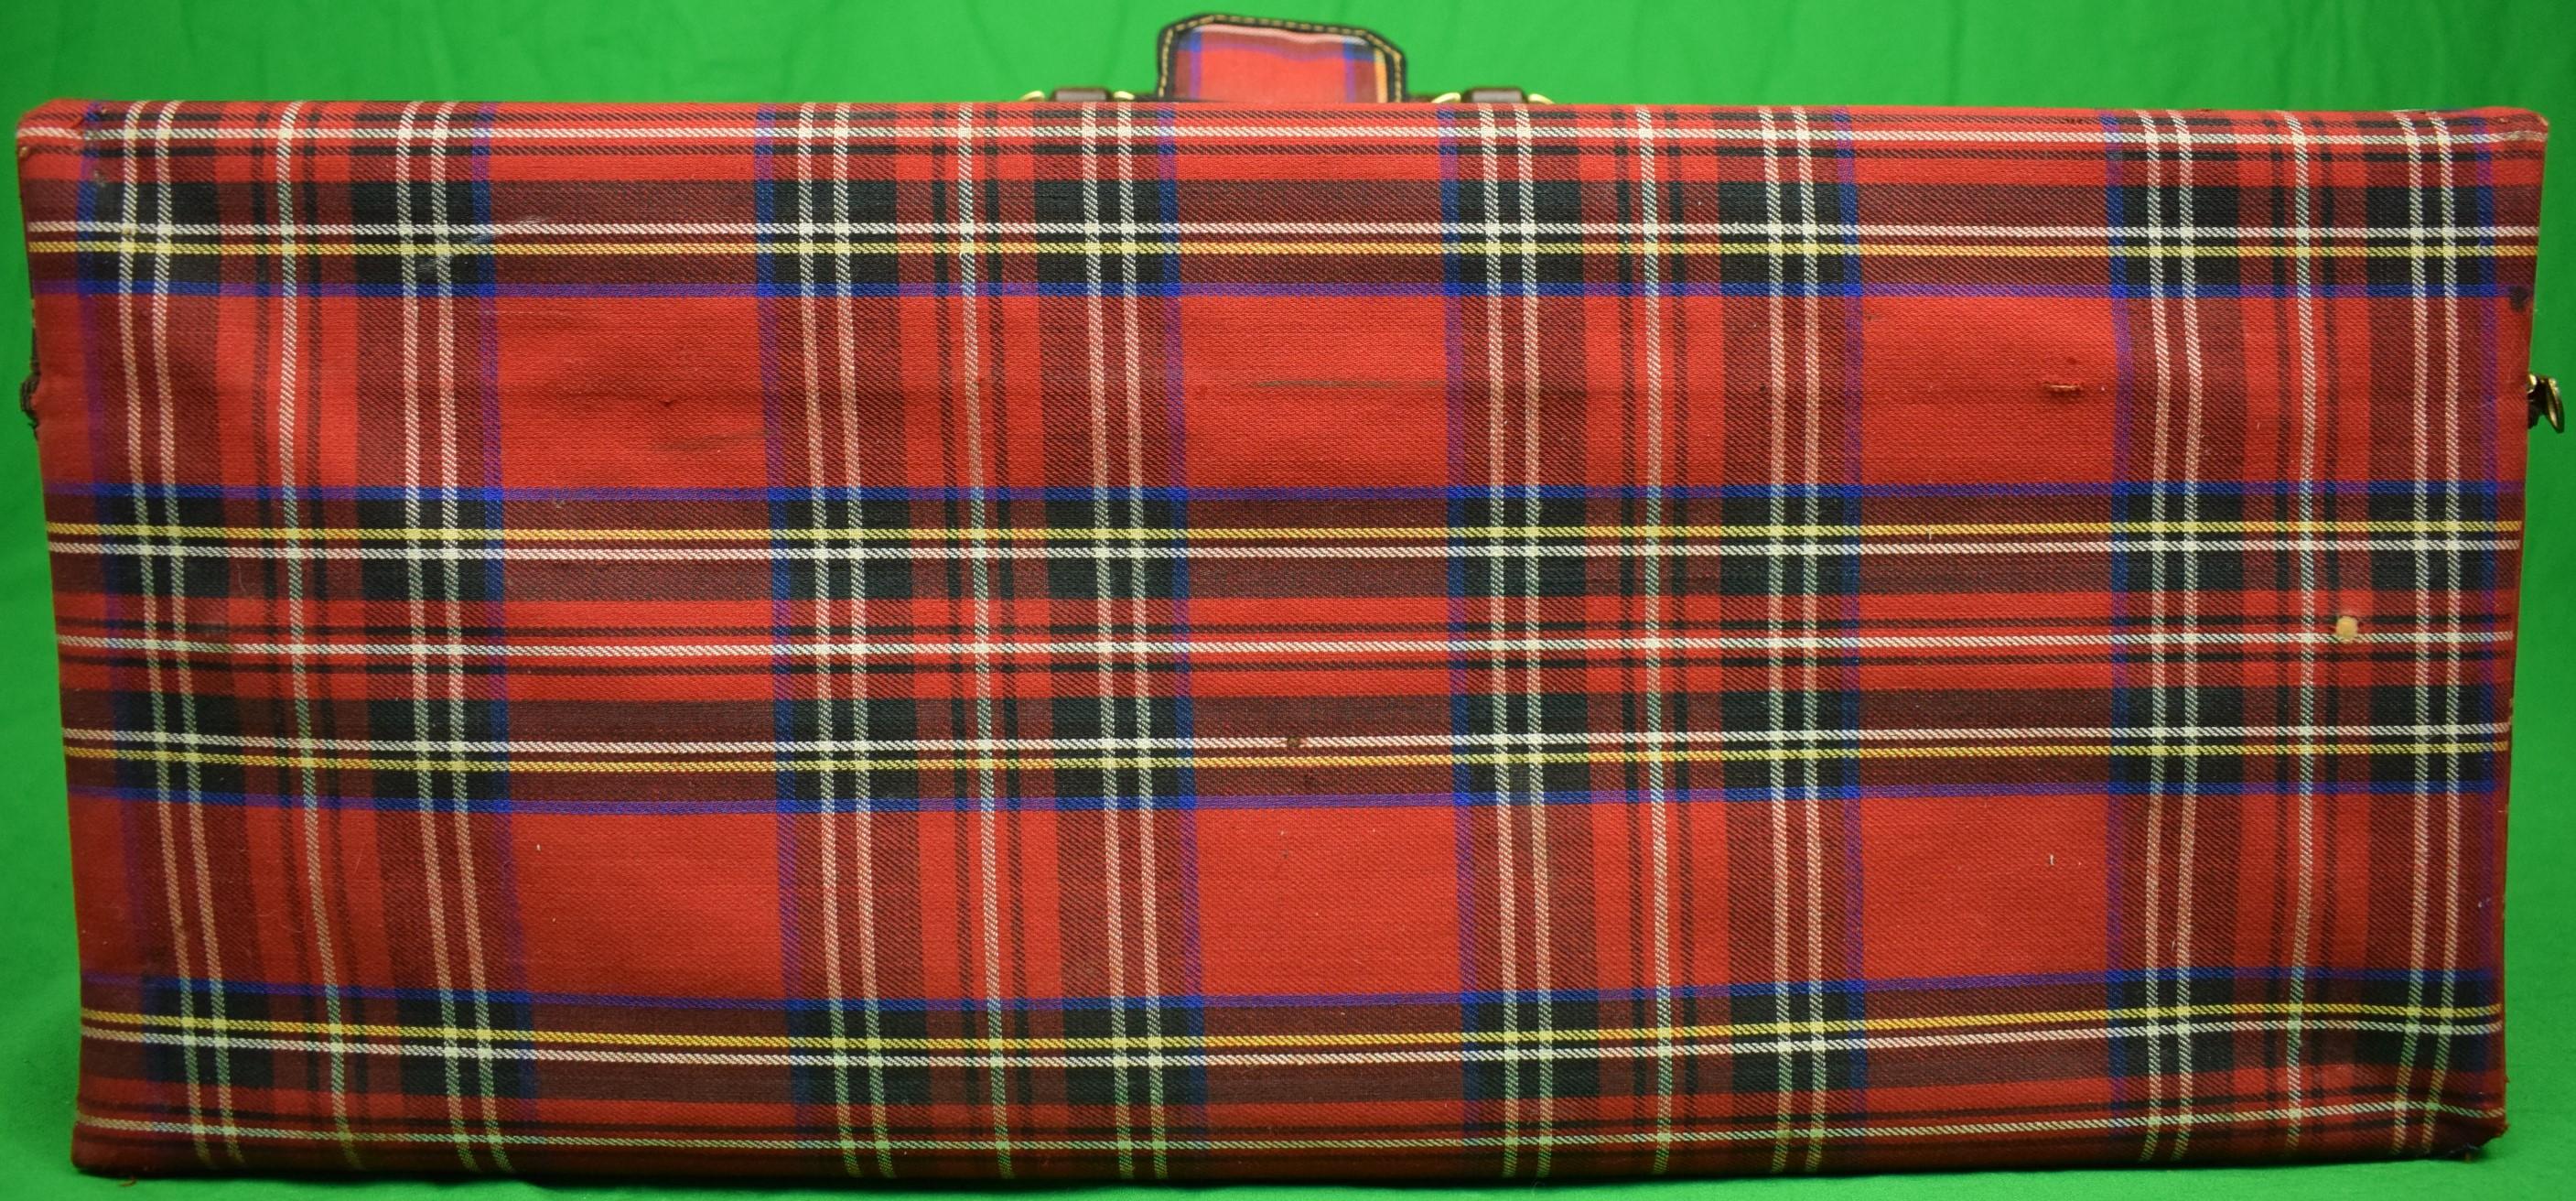 Abercrombie & Fitch Deluxe Mahogany Tackle Box w/ Royal Stewart Tartan Cover For Sale 11